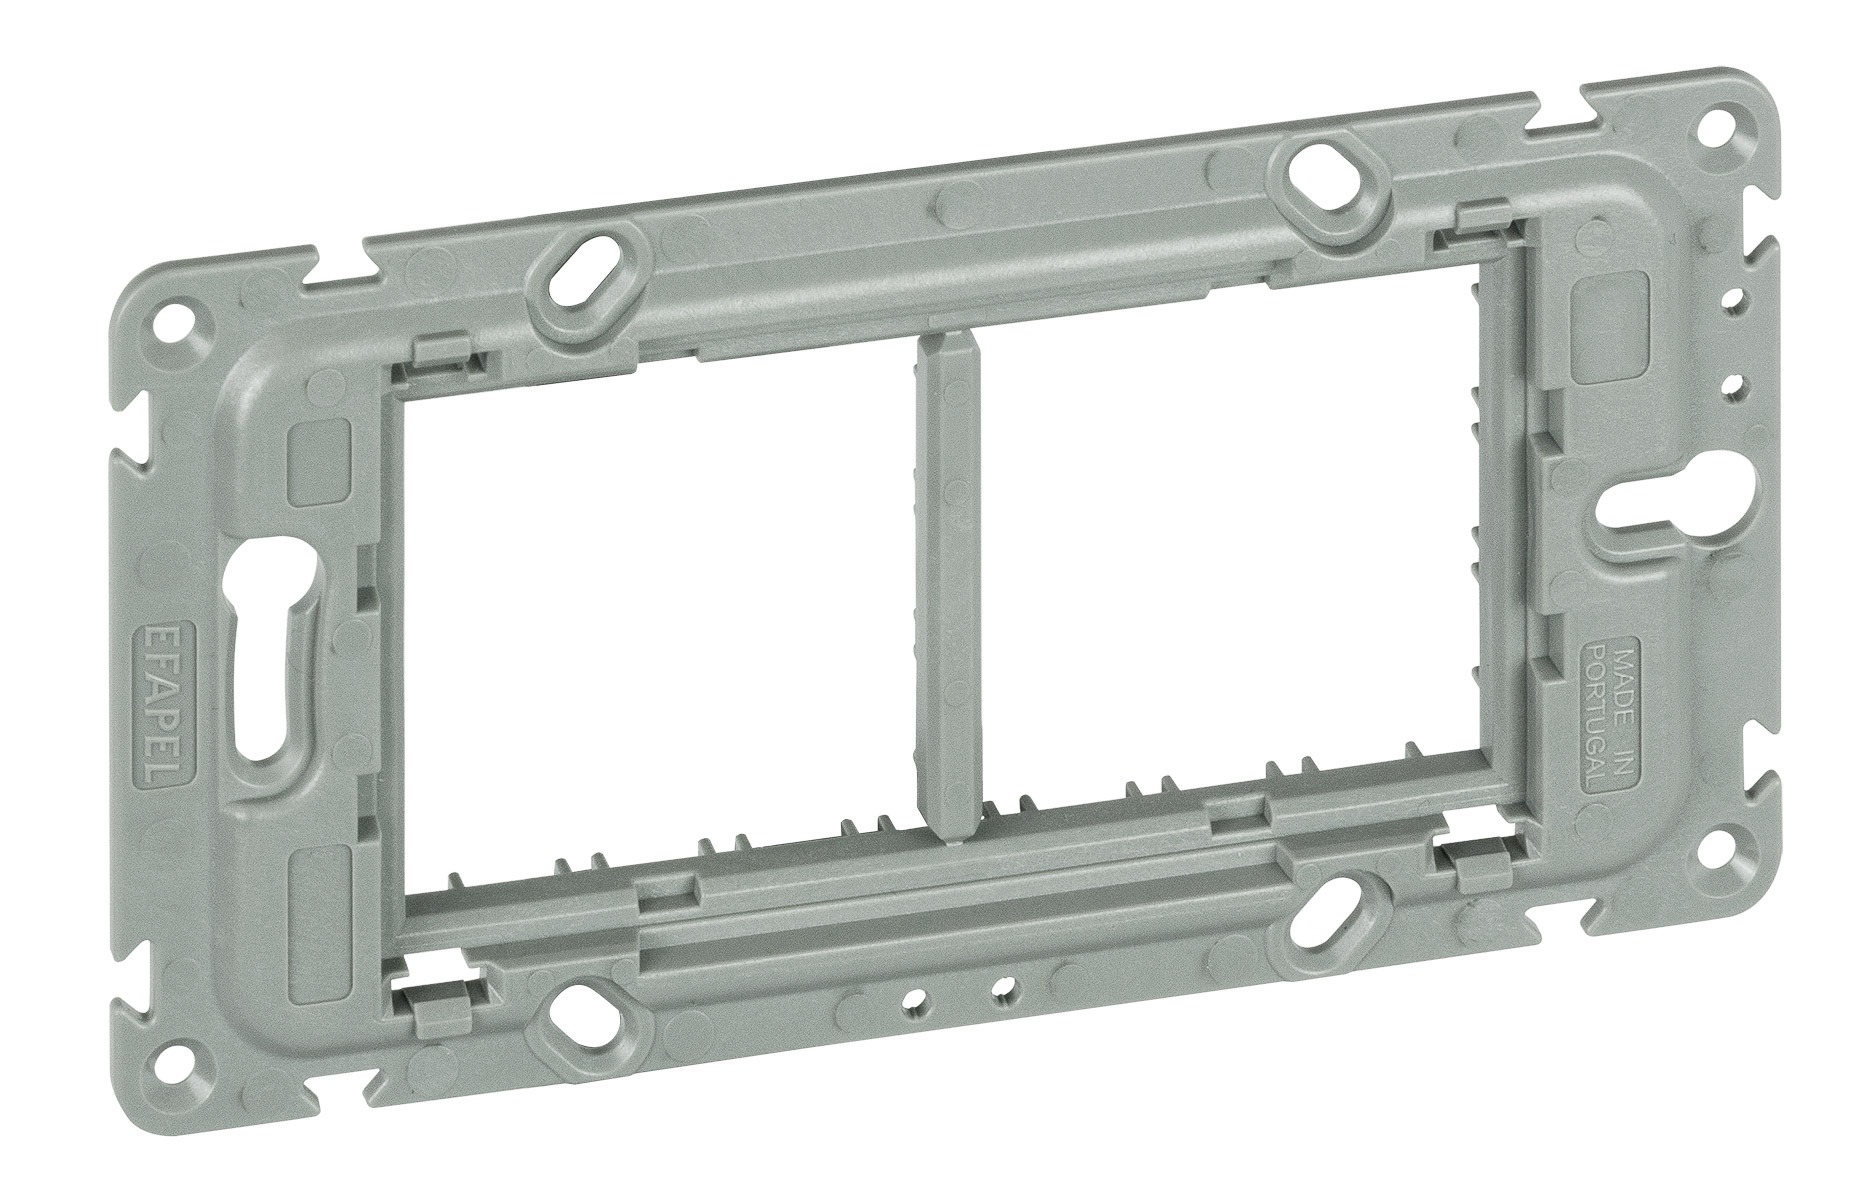 Support Frame up to 4 Modules